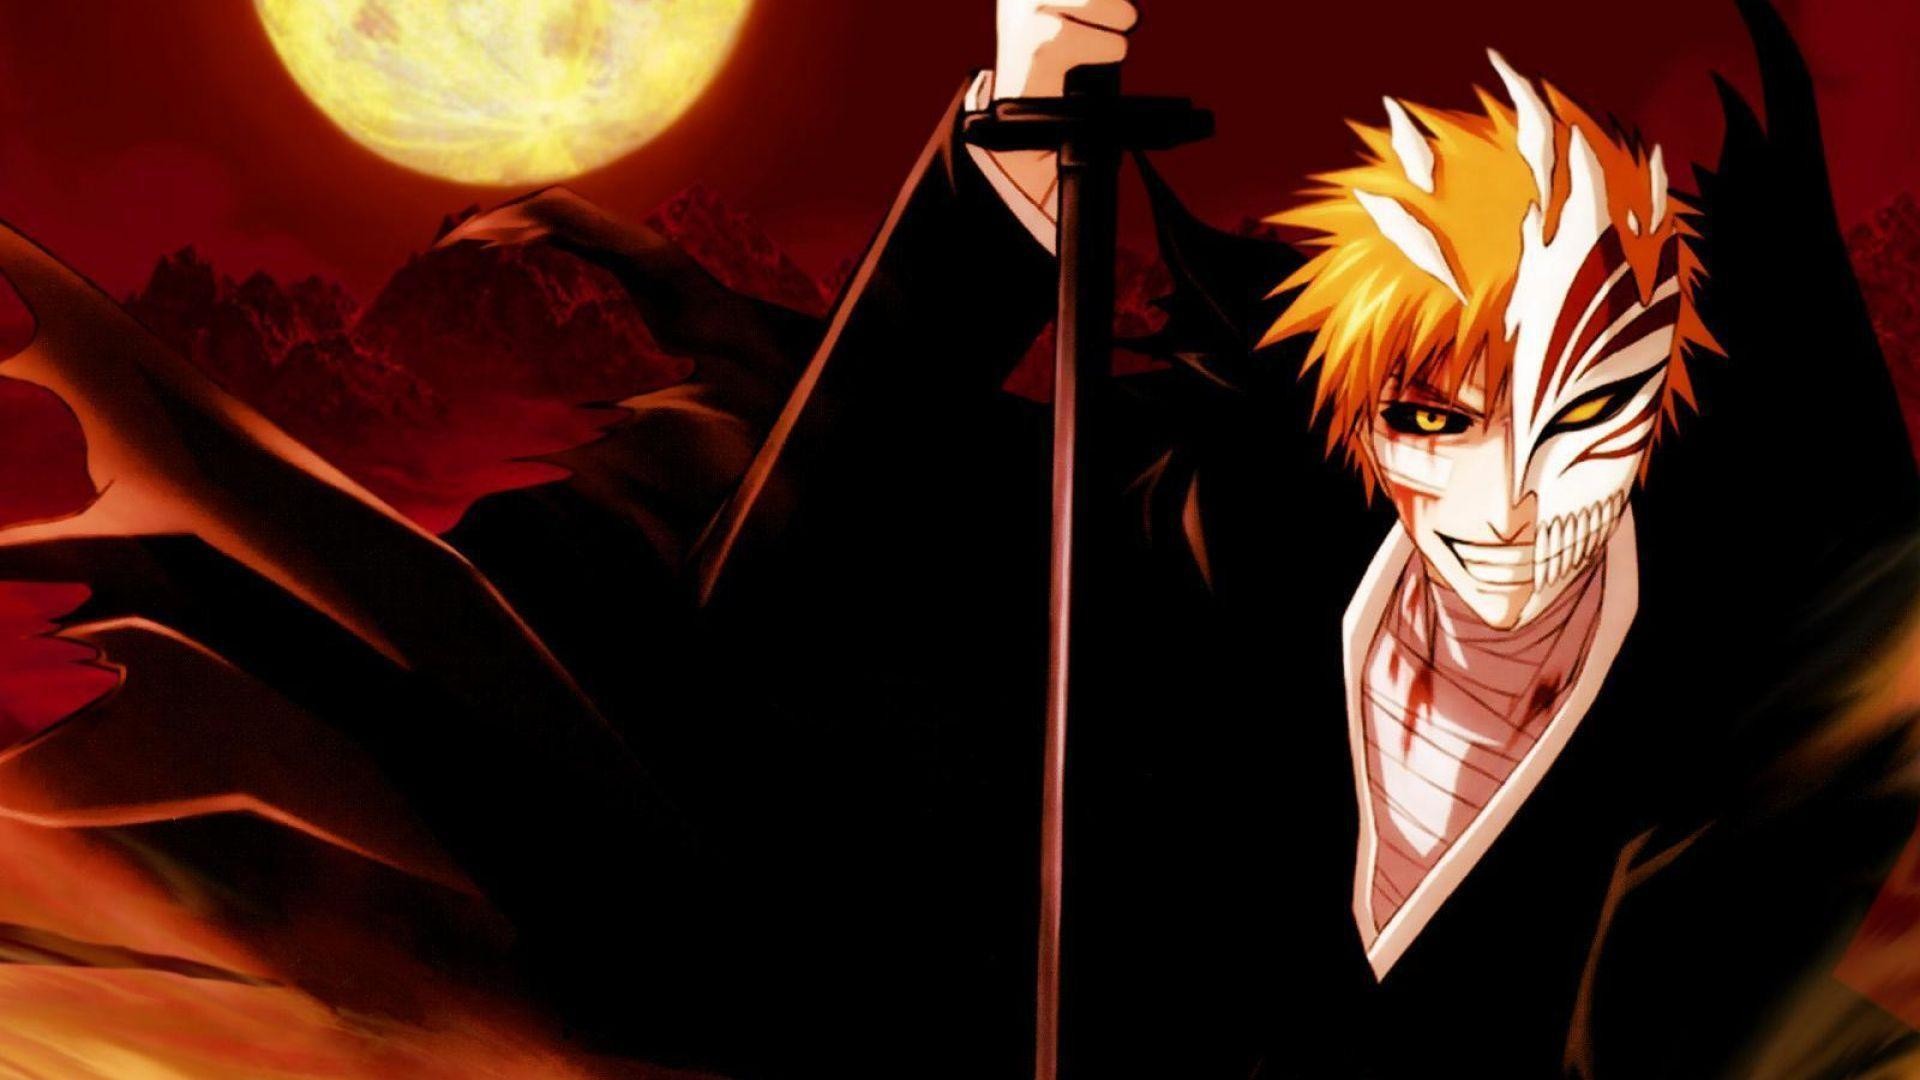 1920x1080 You must definitely watch it if you like Anime series, have a look at some cool  Bleach wallpapers i have found for you.